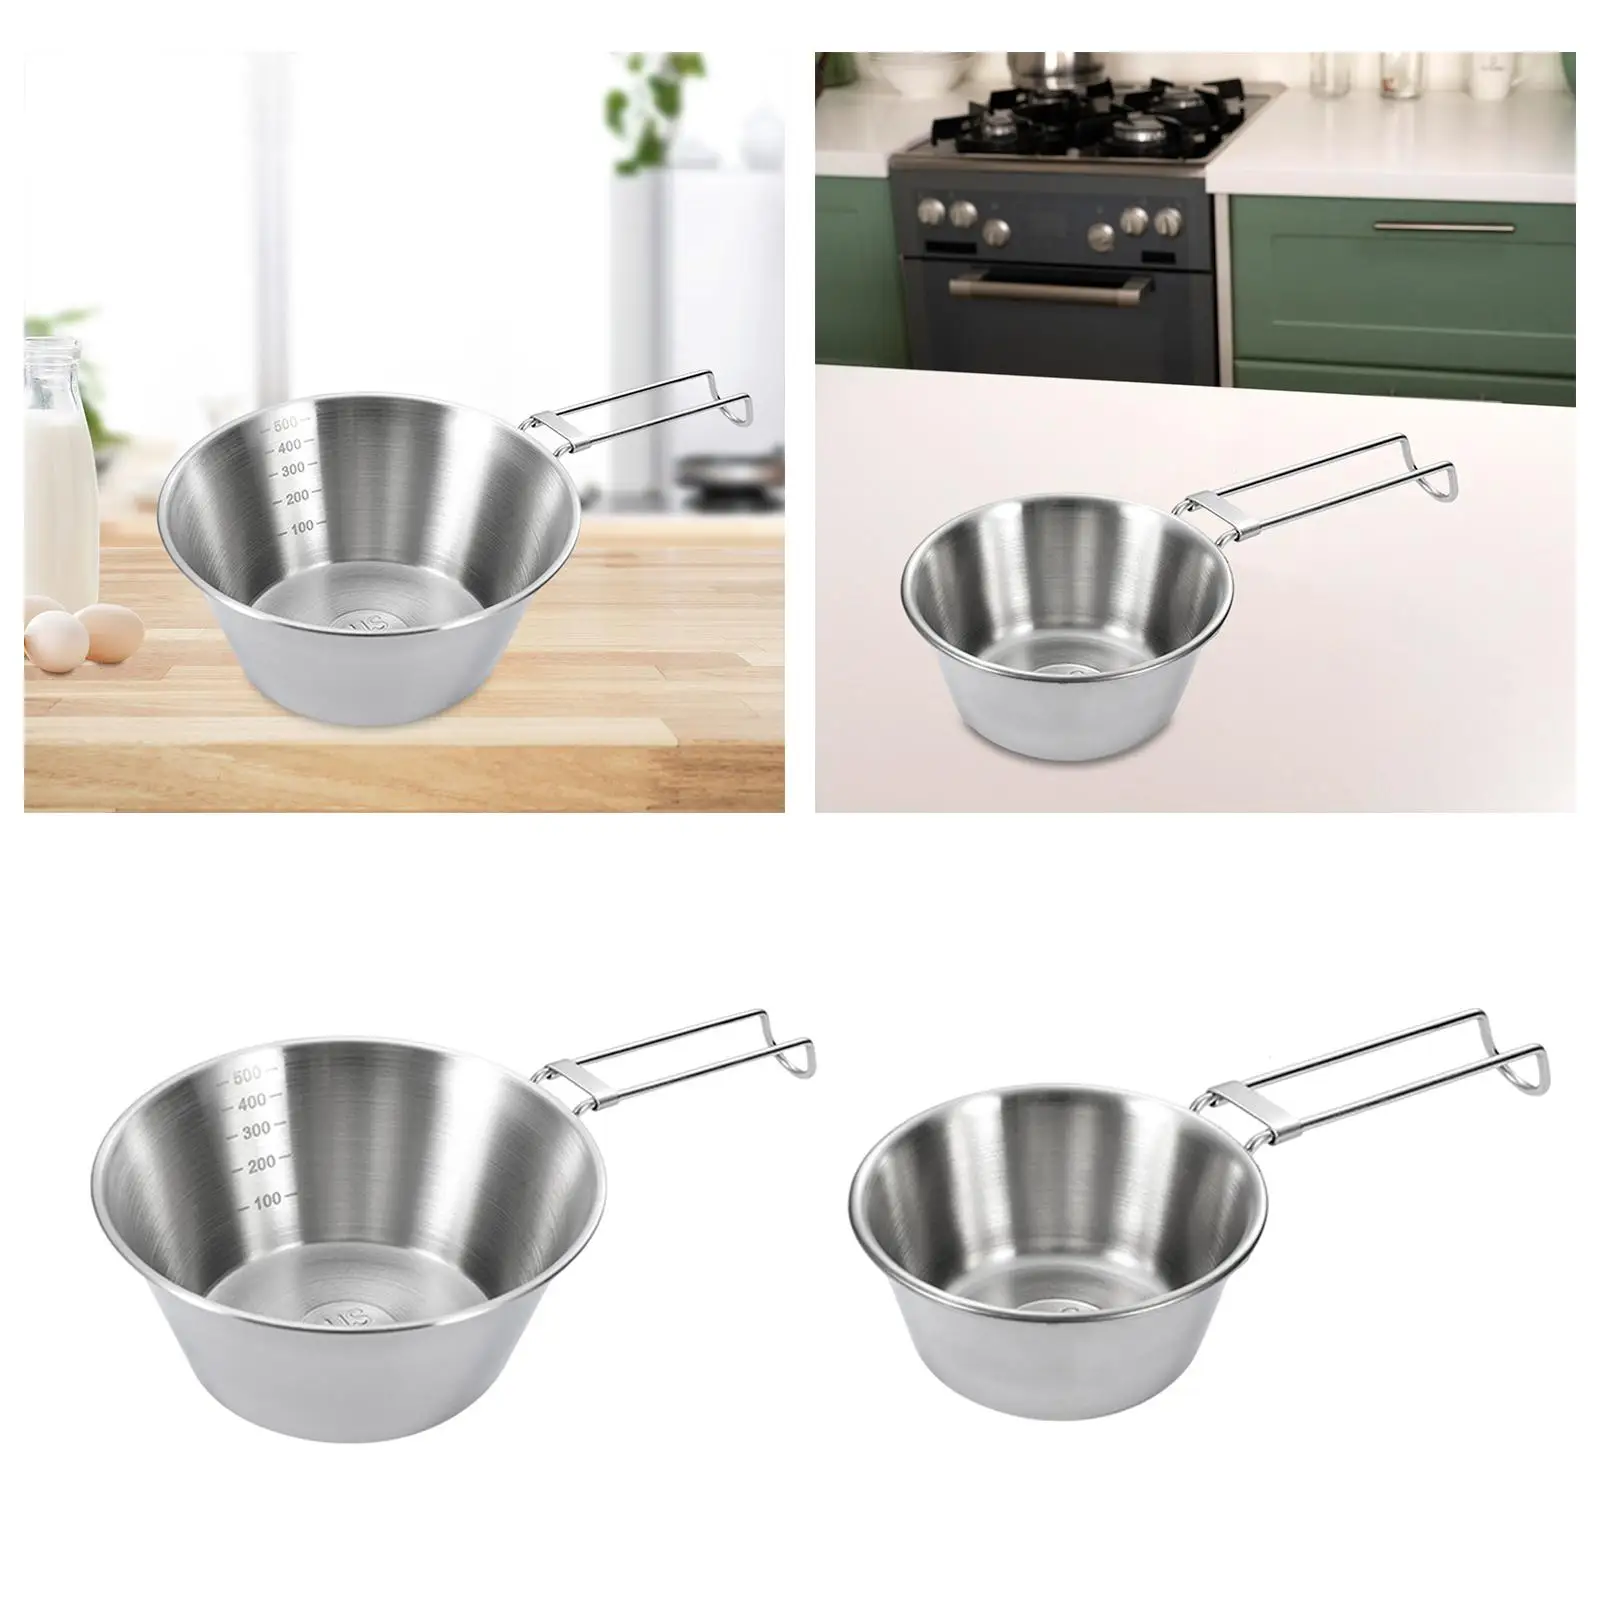 Camping Bowl Cooking Utensils with Folding Handle Tableware Stainless Steel